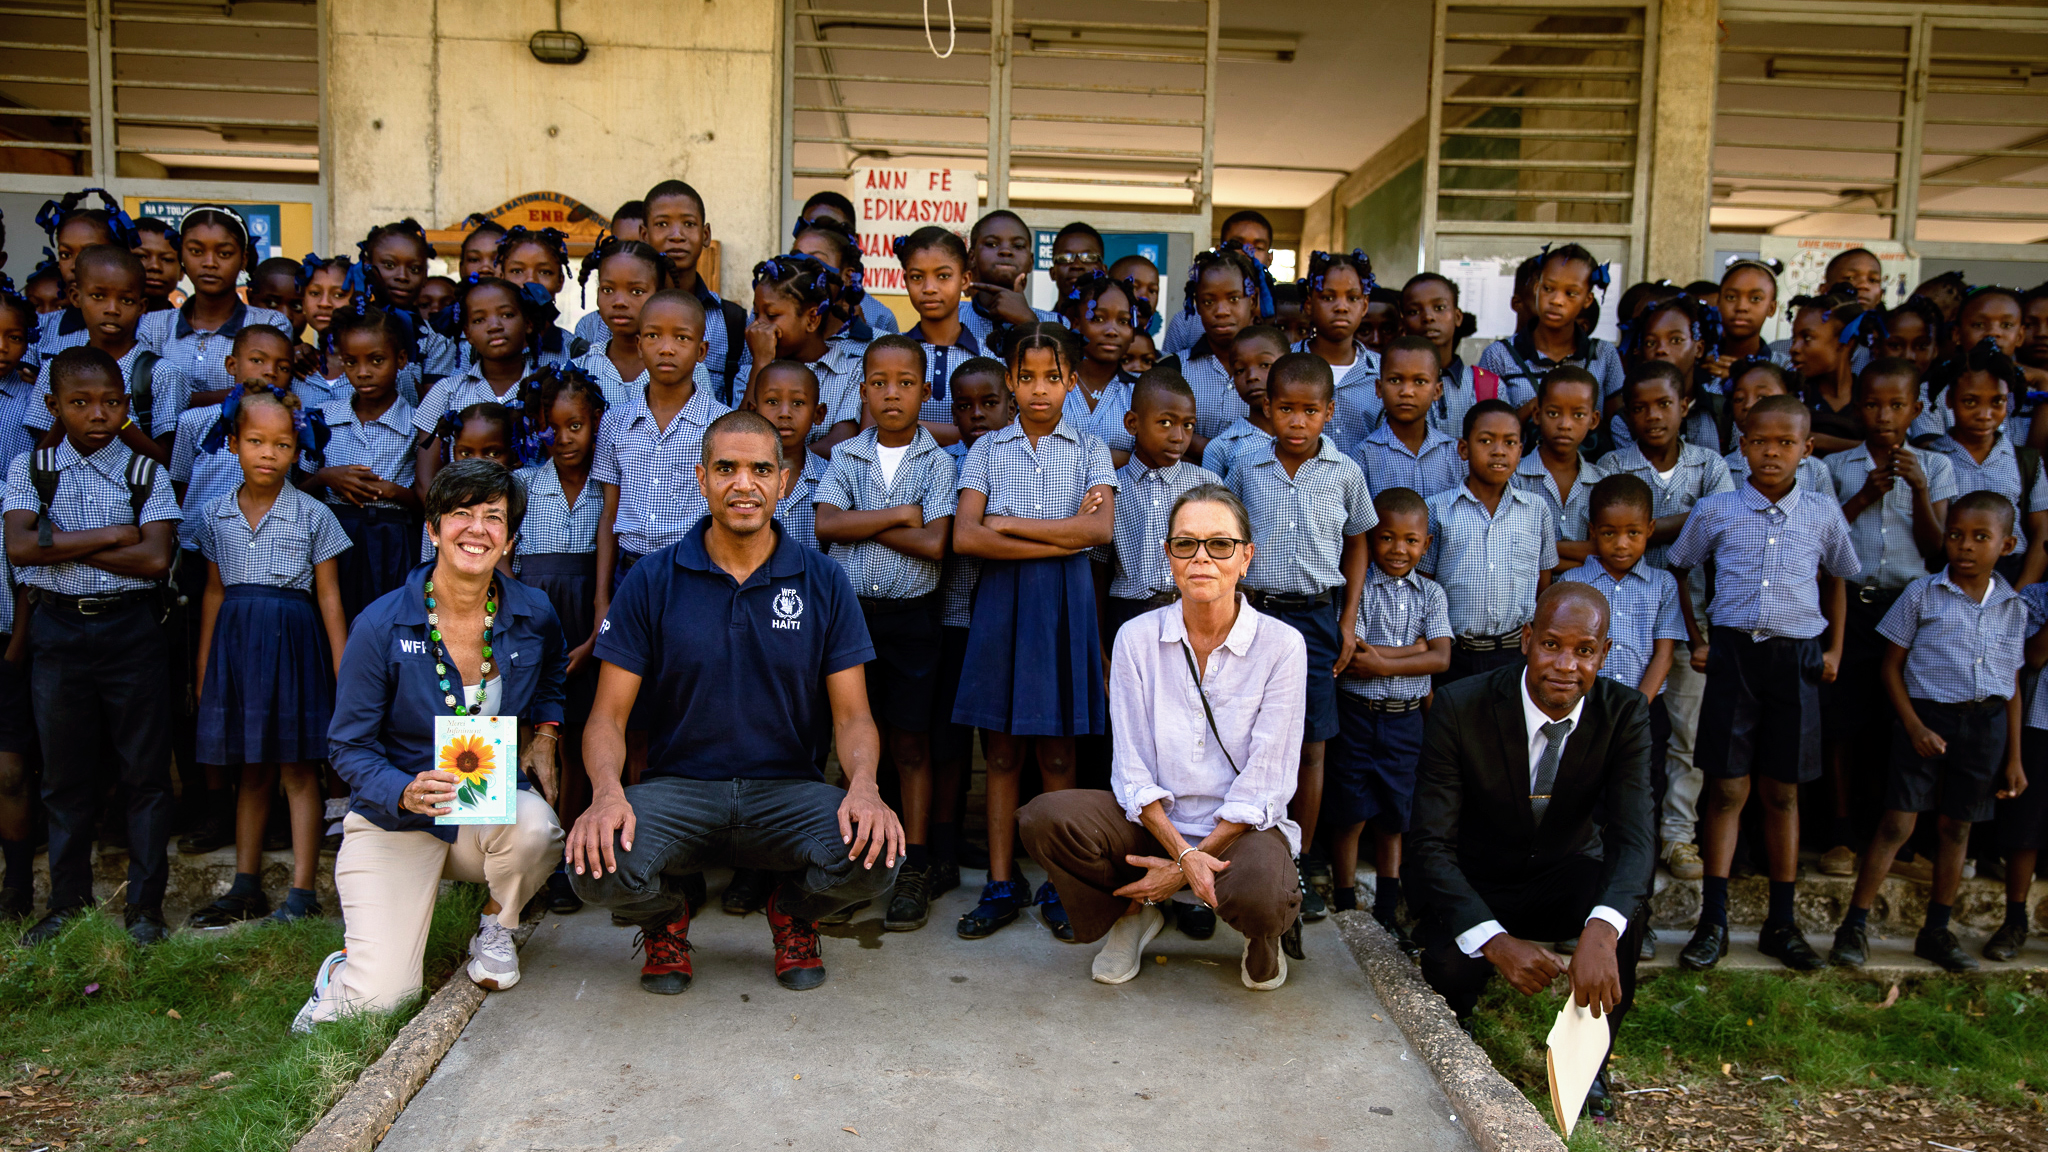 Ulrika Richardson, Lola Castro, and WFP staff take a group photo with school children